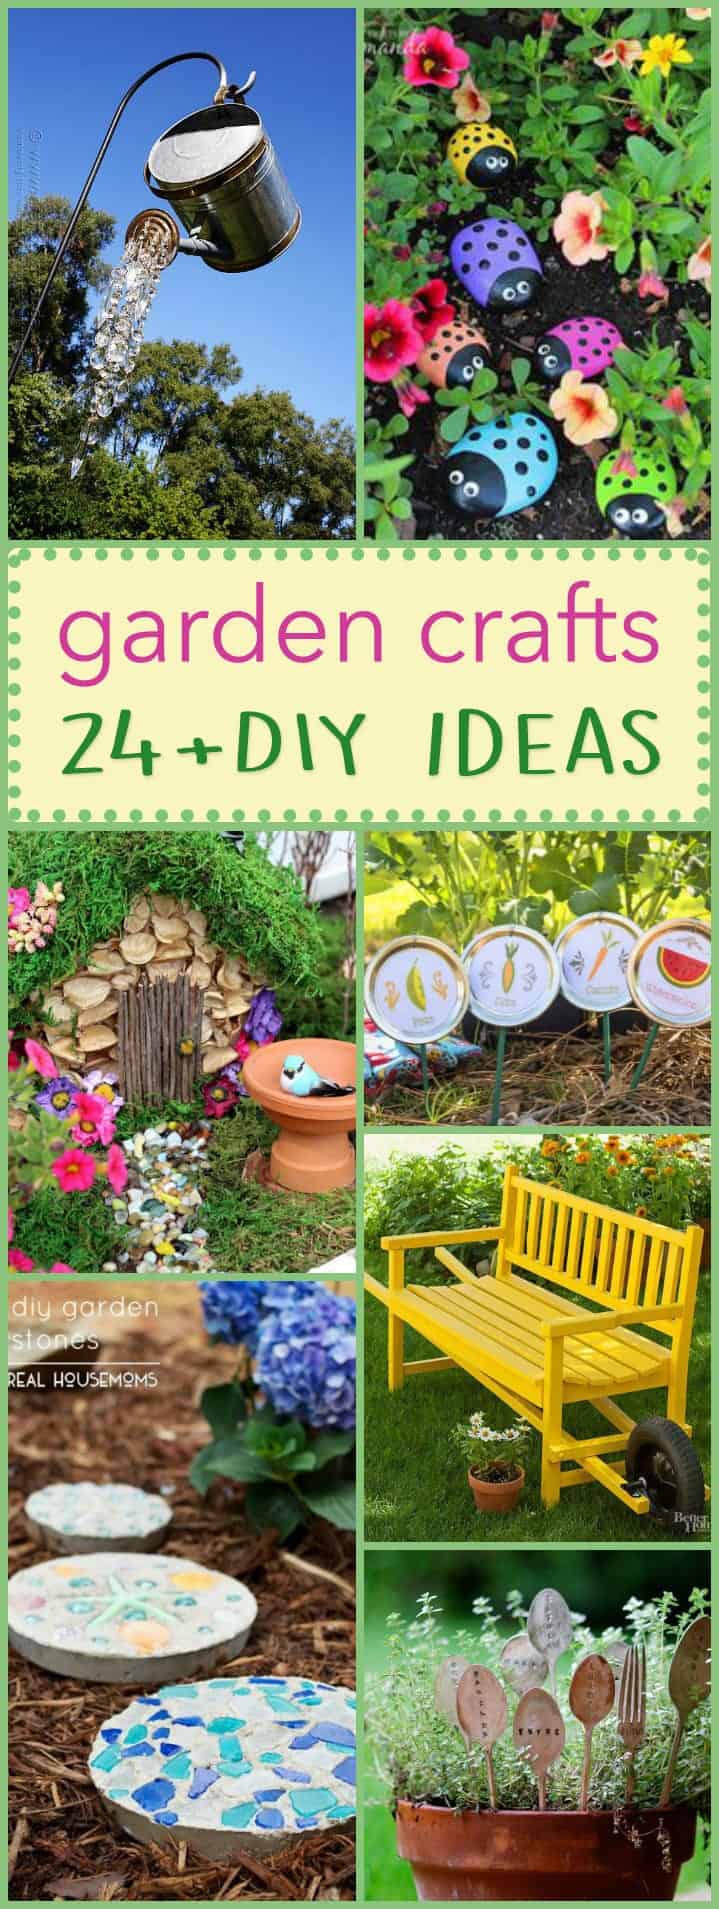 These DIY garden crafts are the perfect projects to display throughout your garden. These crafts are a fun & creative way to personalize your garden space!